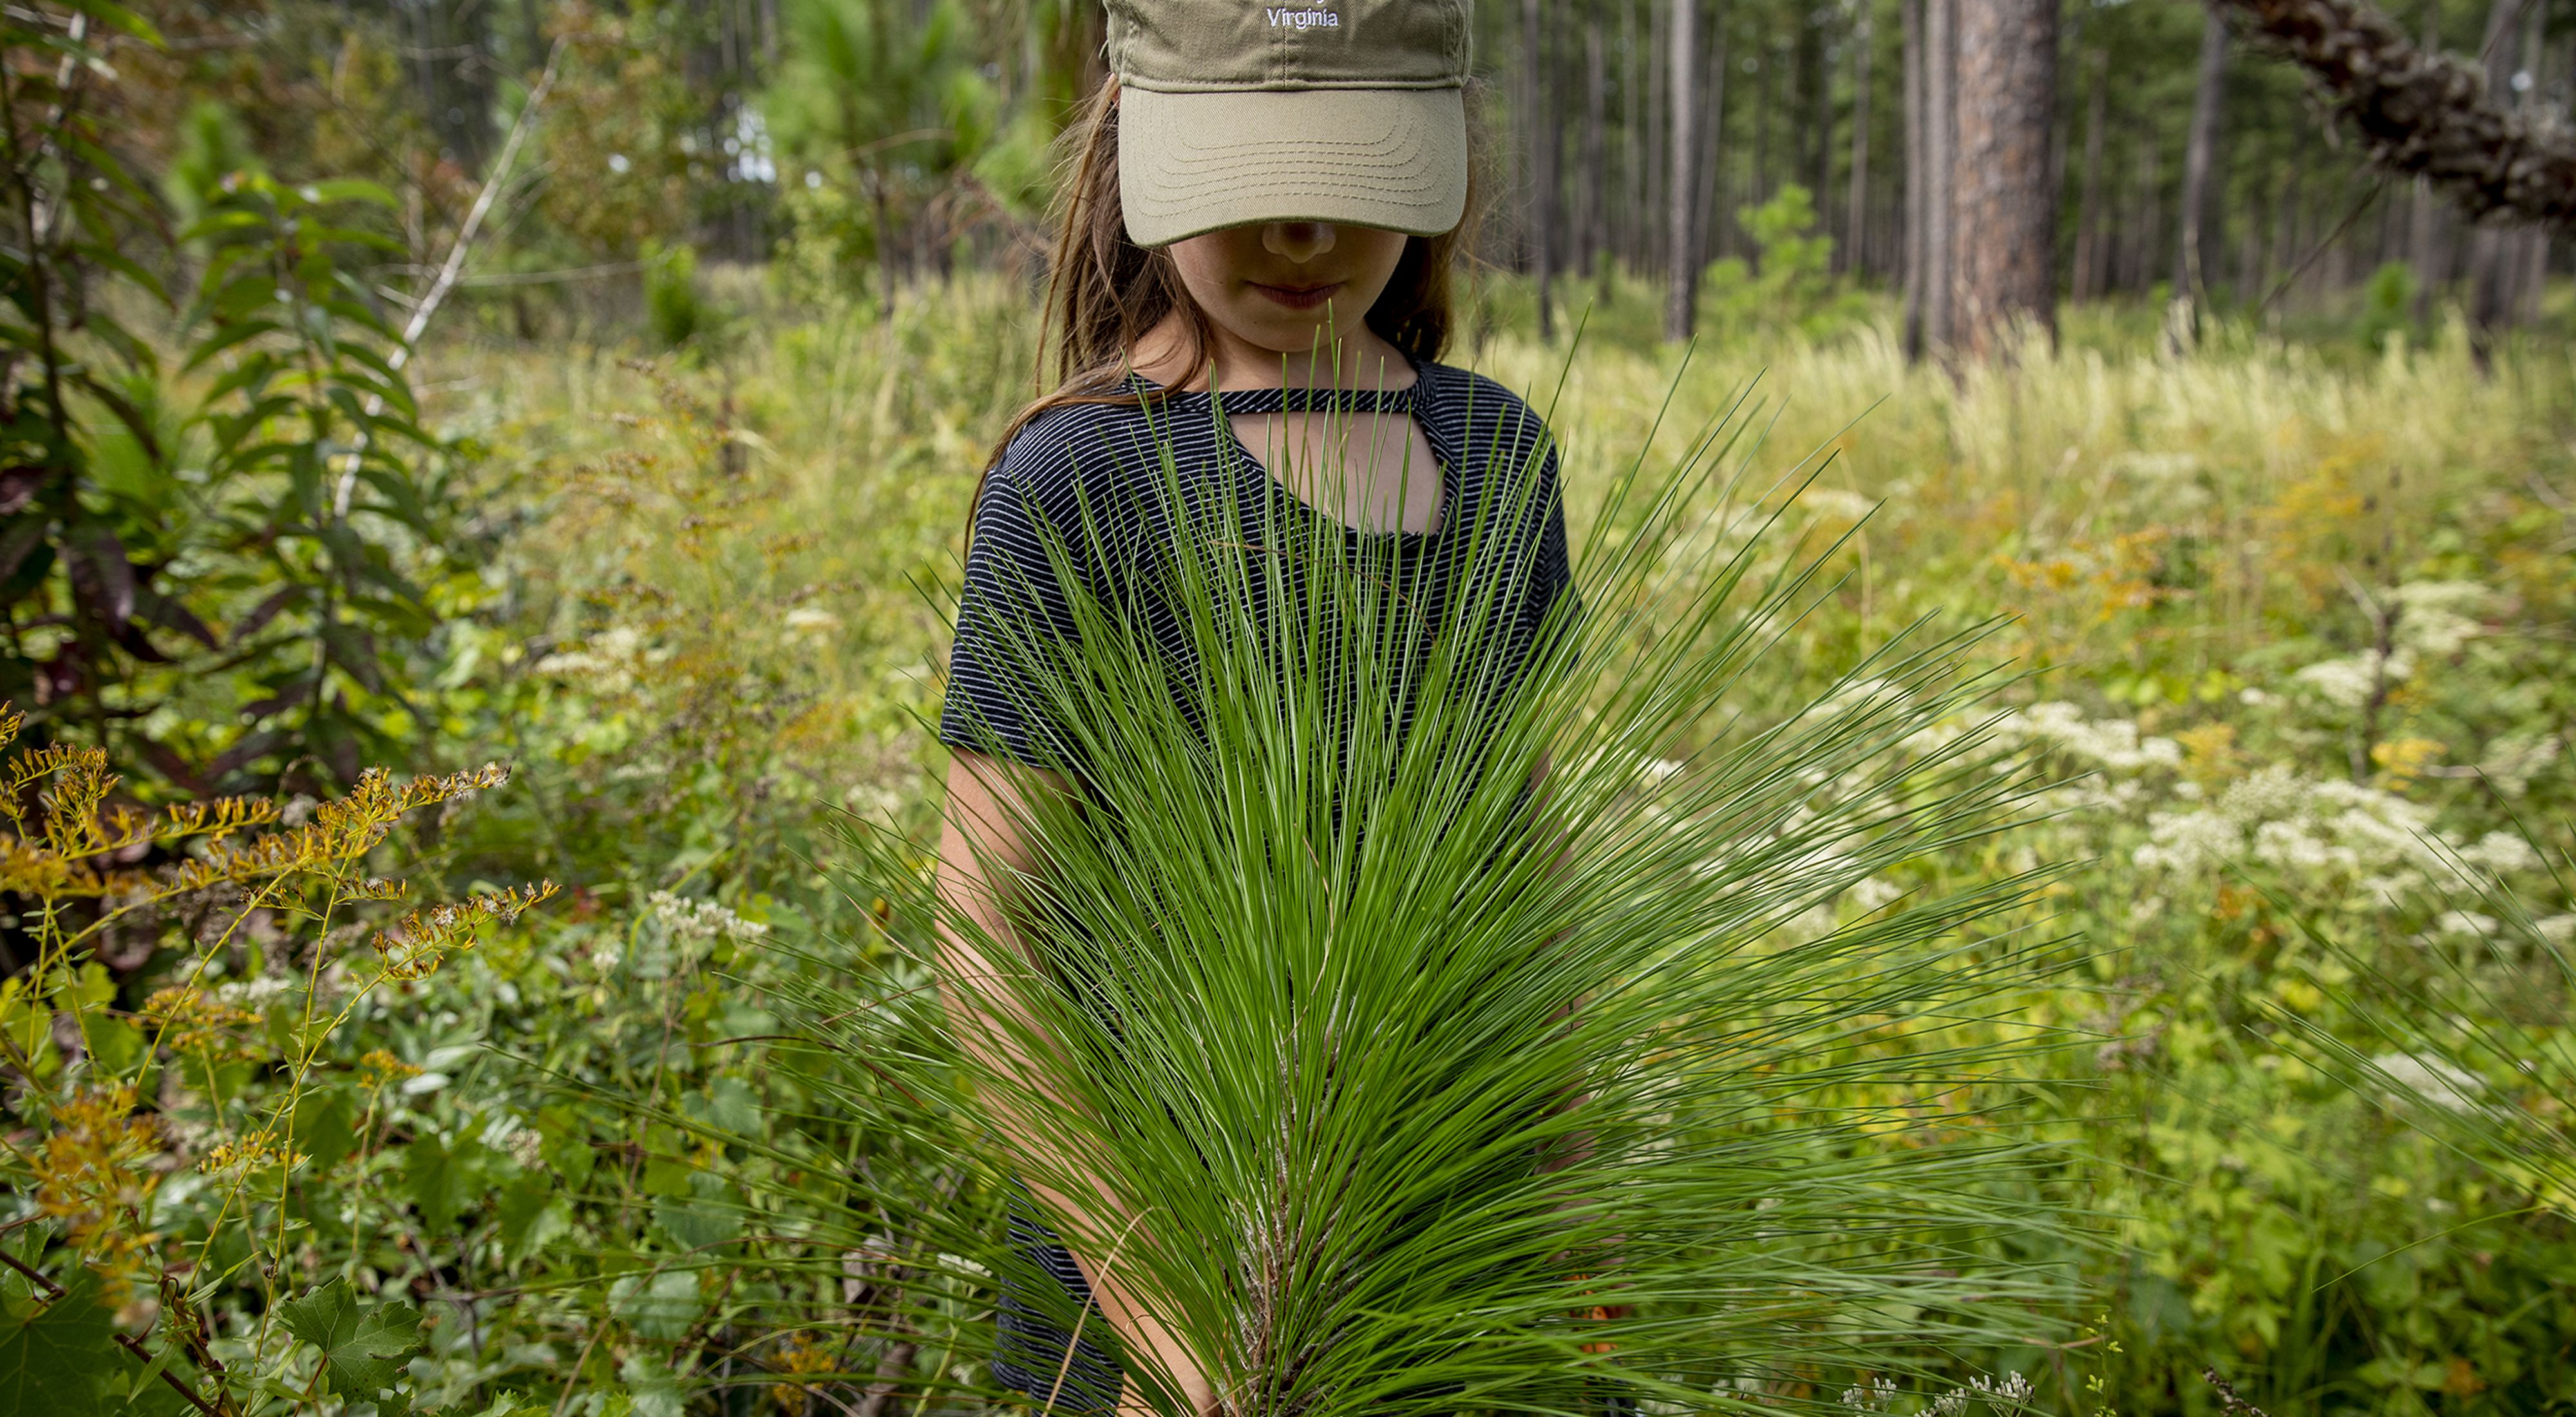 A young girl looks down on the spikey green needles of a longleaf pine seedling at TNC's Piney Grove Preserve. Tall flowers and grasses grow behind her.